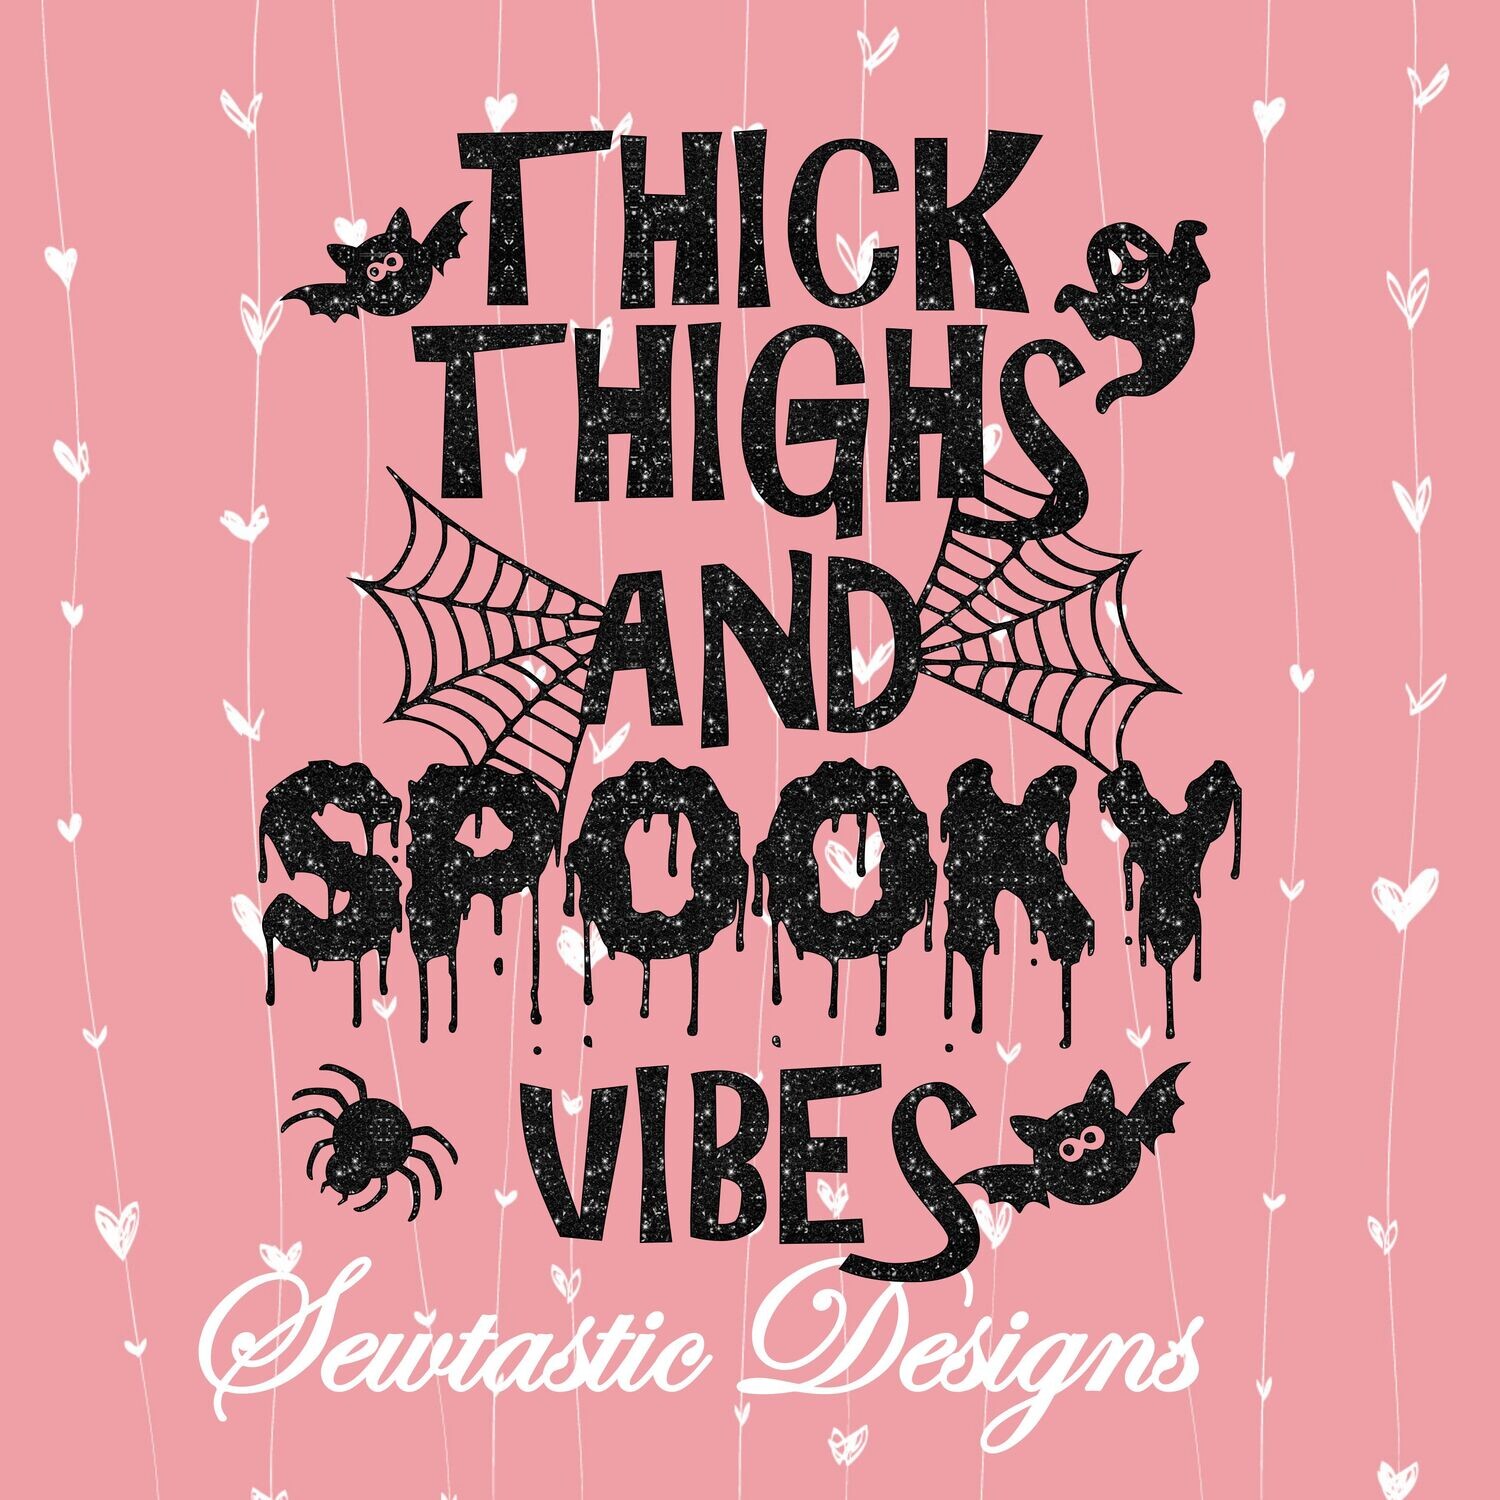 Thick Thighs and Spooky Vibes SVG, Thick Thighs SVG, Spooky SVG, Vibes SVG, Halloween SVG, Ghost SVG, Bat SVG, Spider SVG, Cut File, Iron On, Decal, Cricut, Silhouette, ScanNCut &amp; Many More.